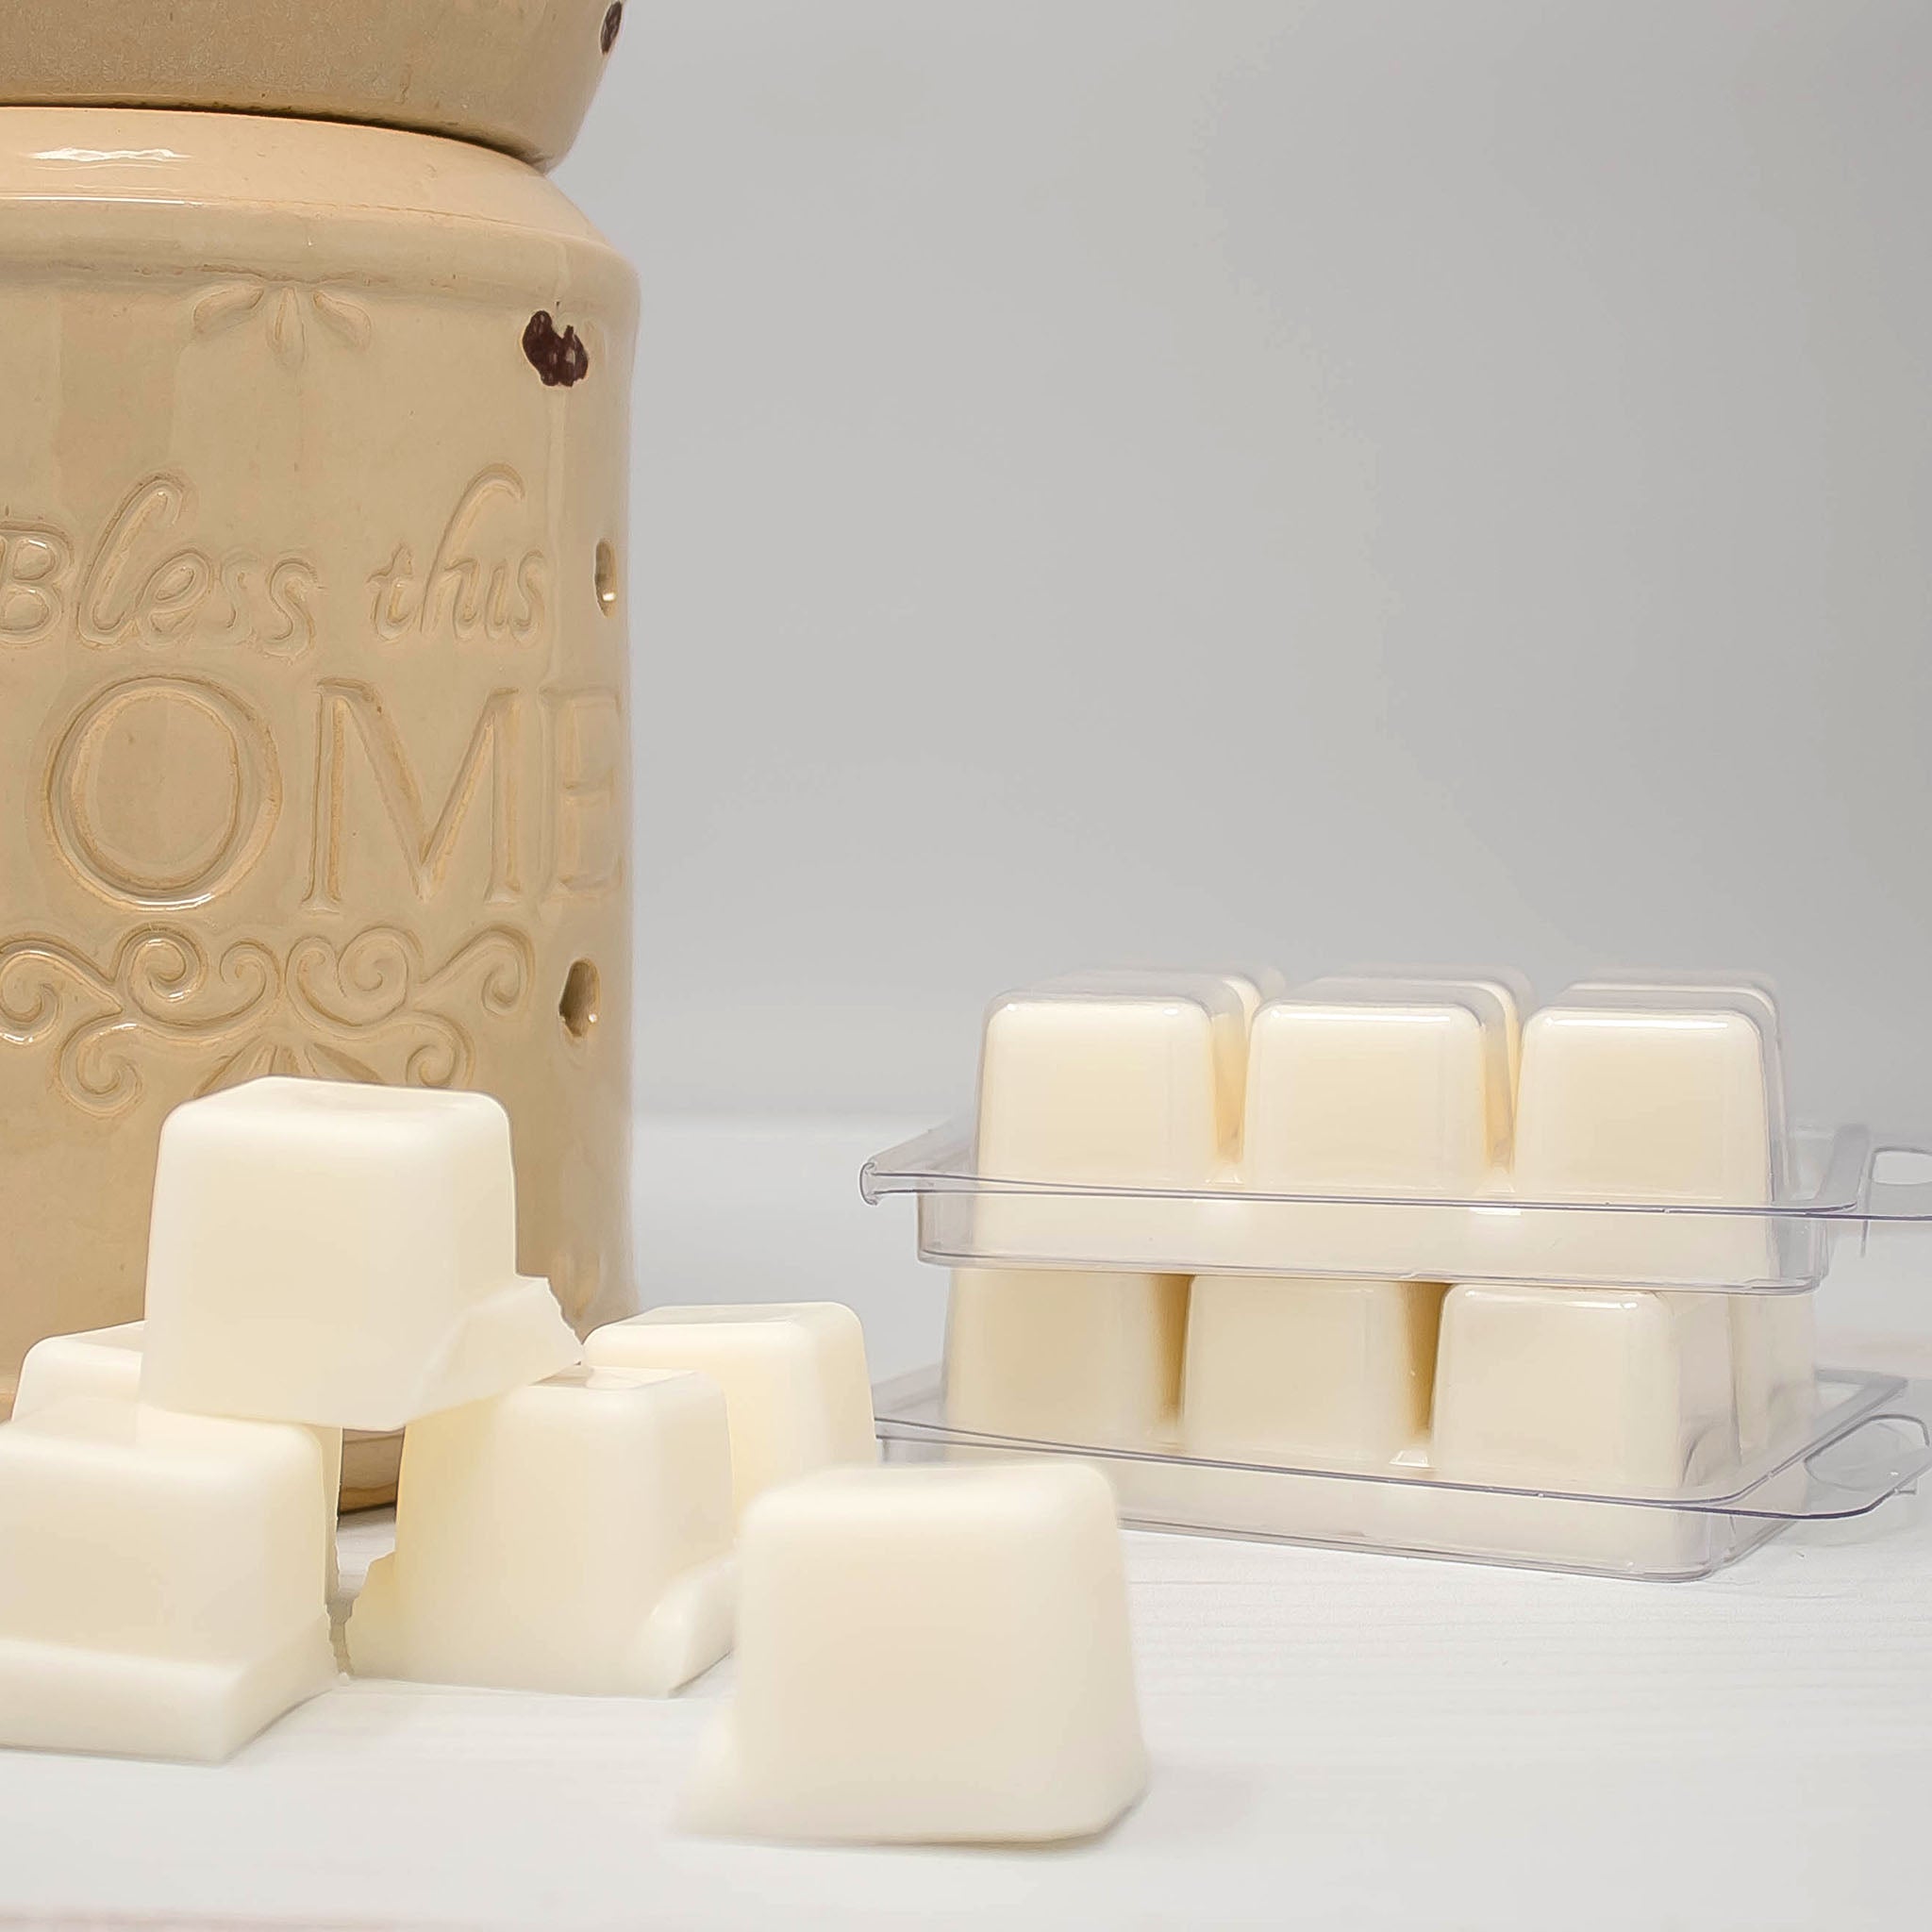 White Christmas - Scented Wax Cube Melts